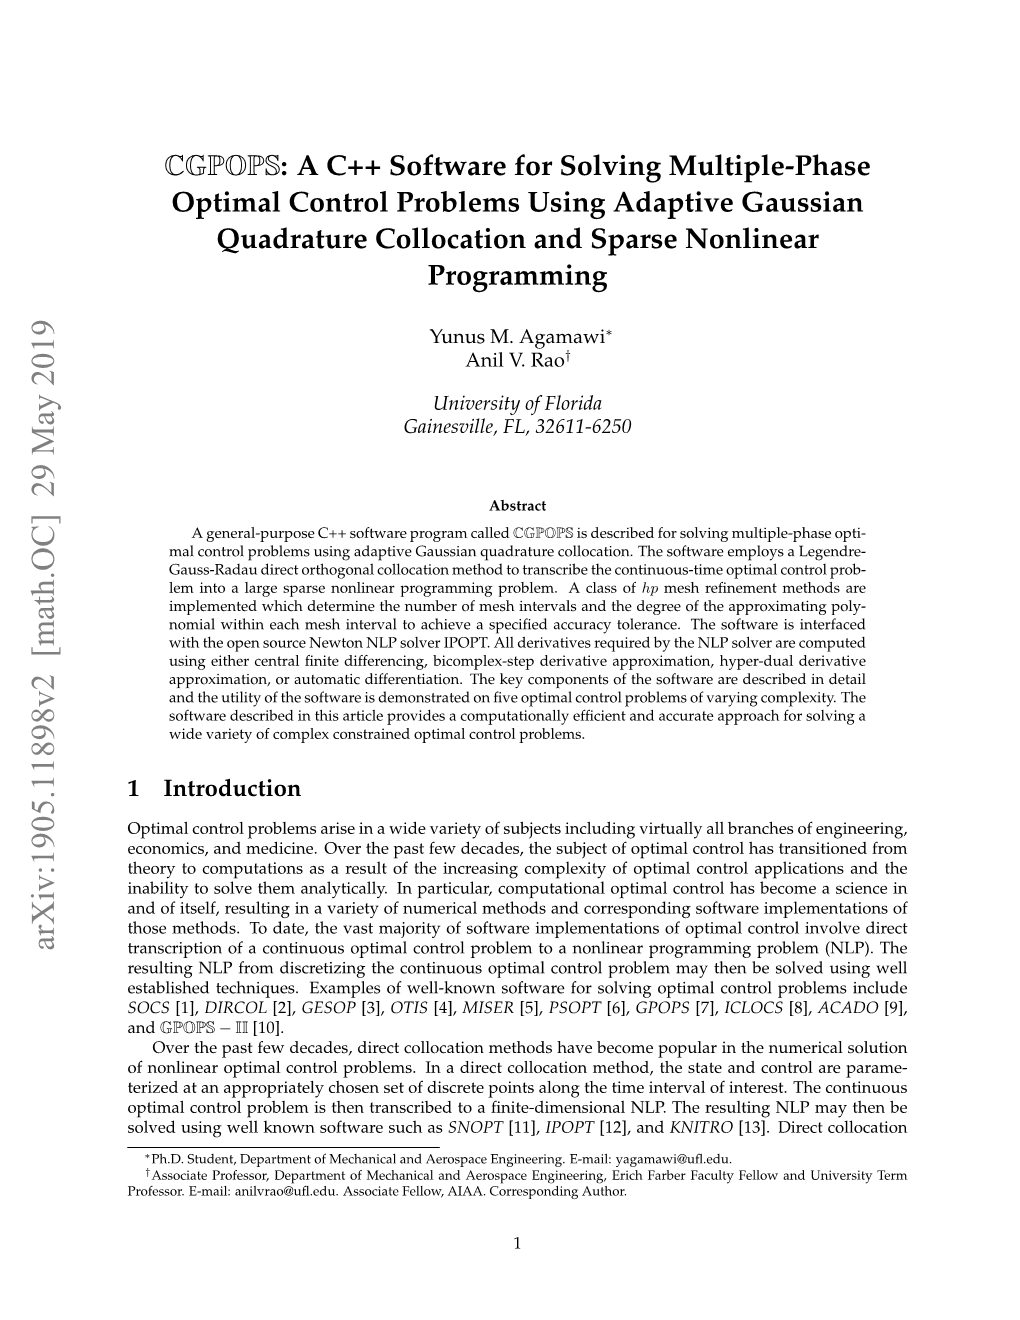 CGPOPS: a C++ Software for Solving Multiple-Phase Optimal Control Problems Using Adaptive Gaussian Quadrature Collocation and Sparse Nonlinear Programming